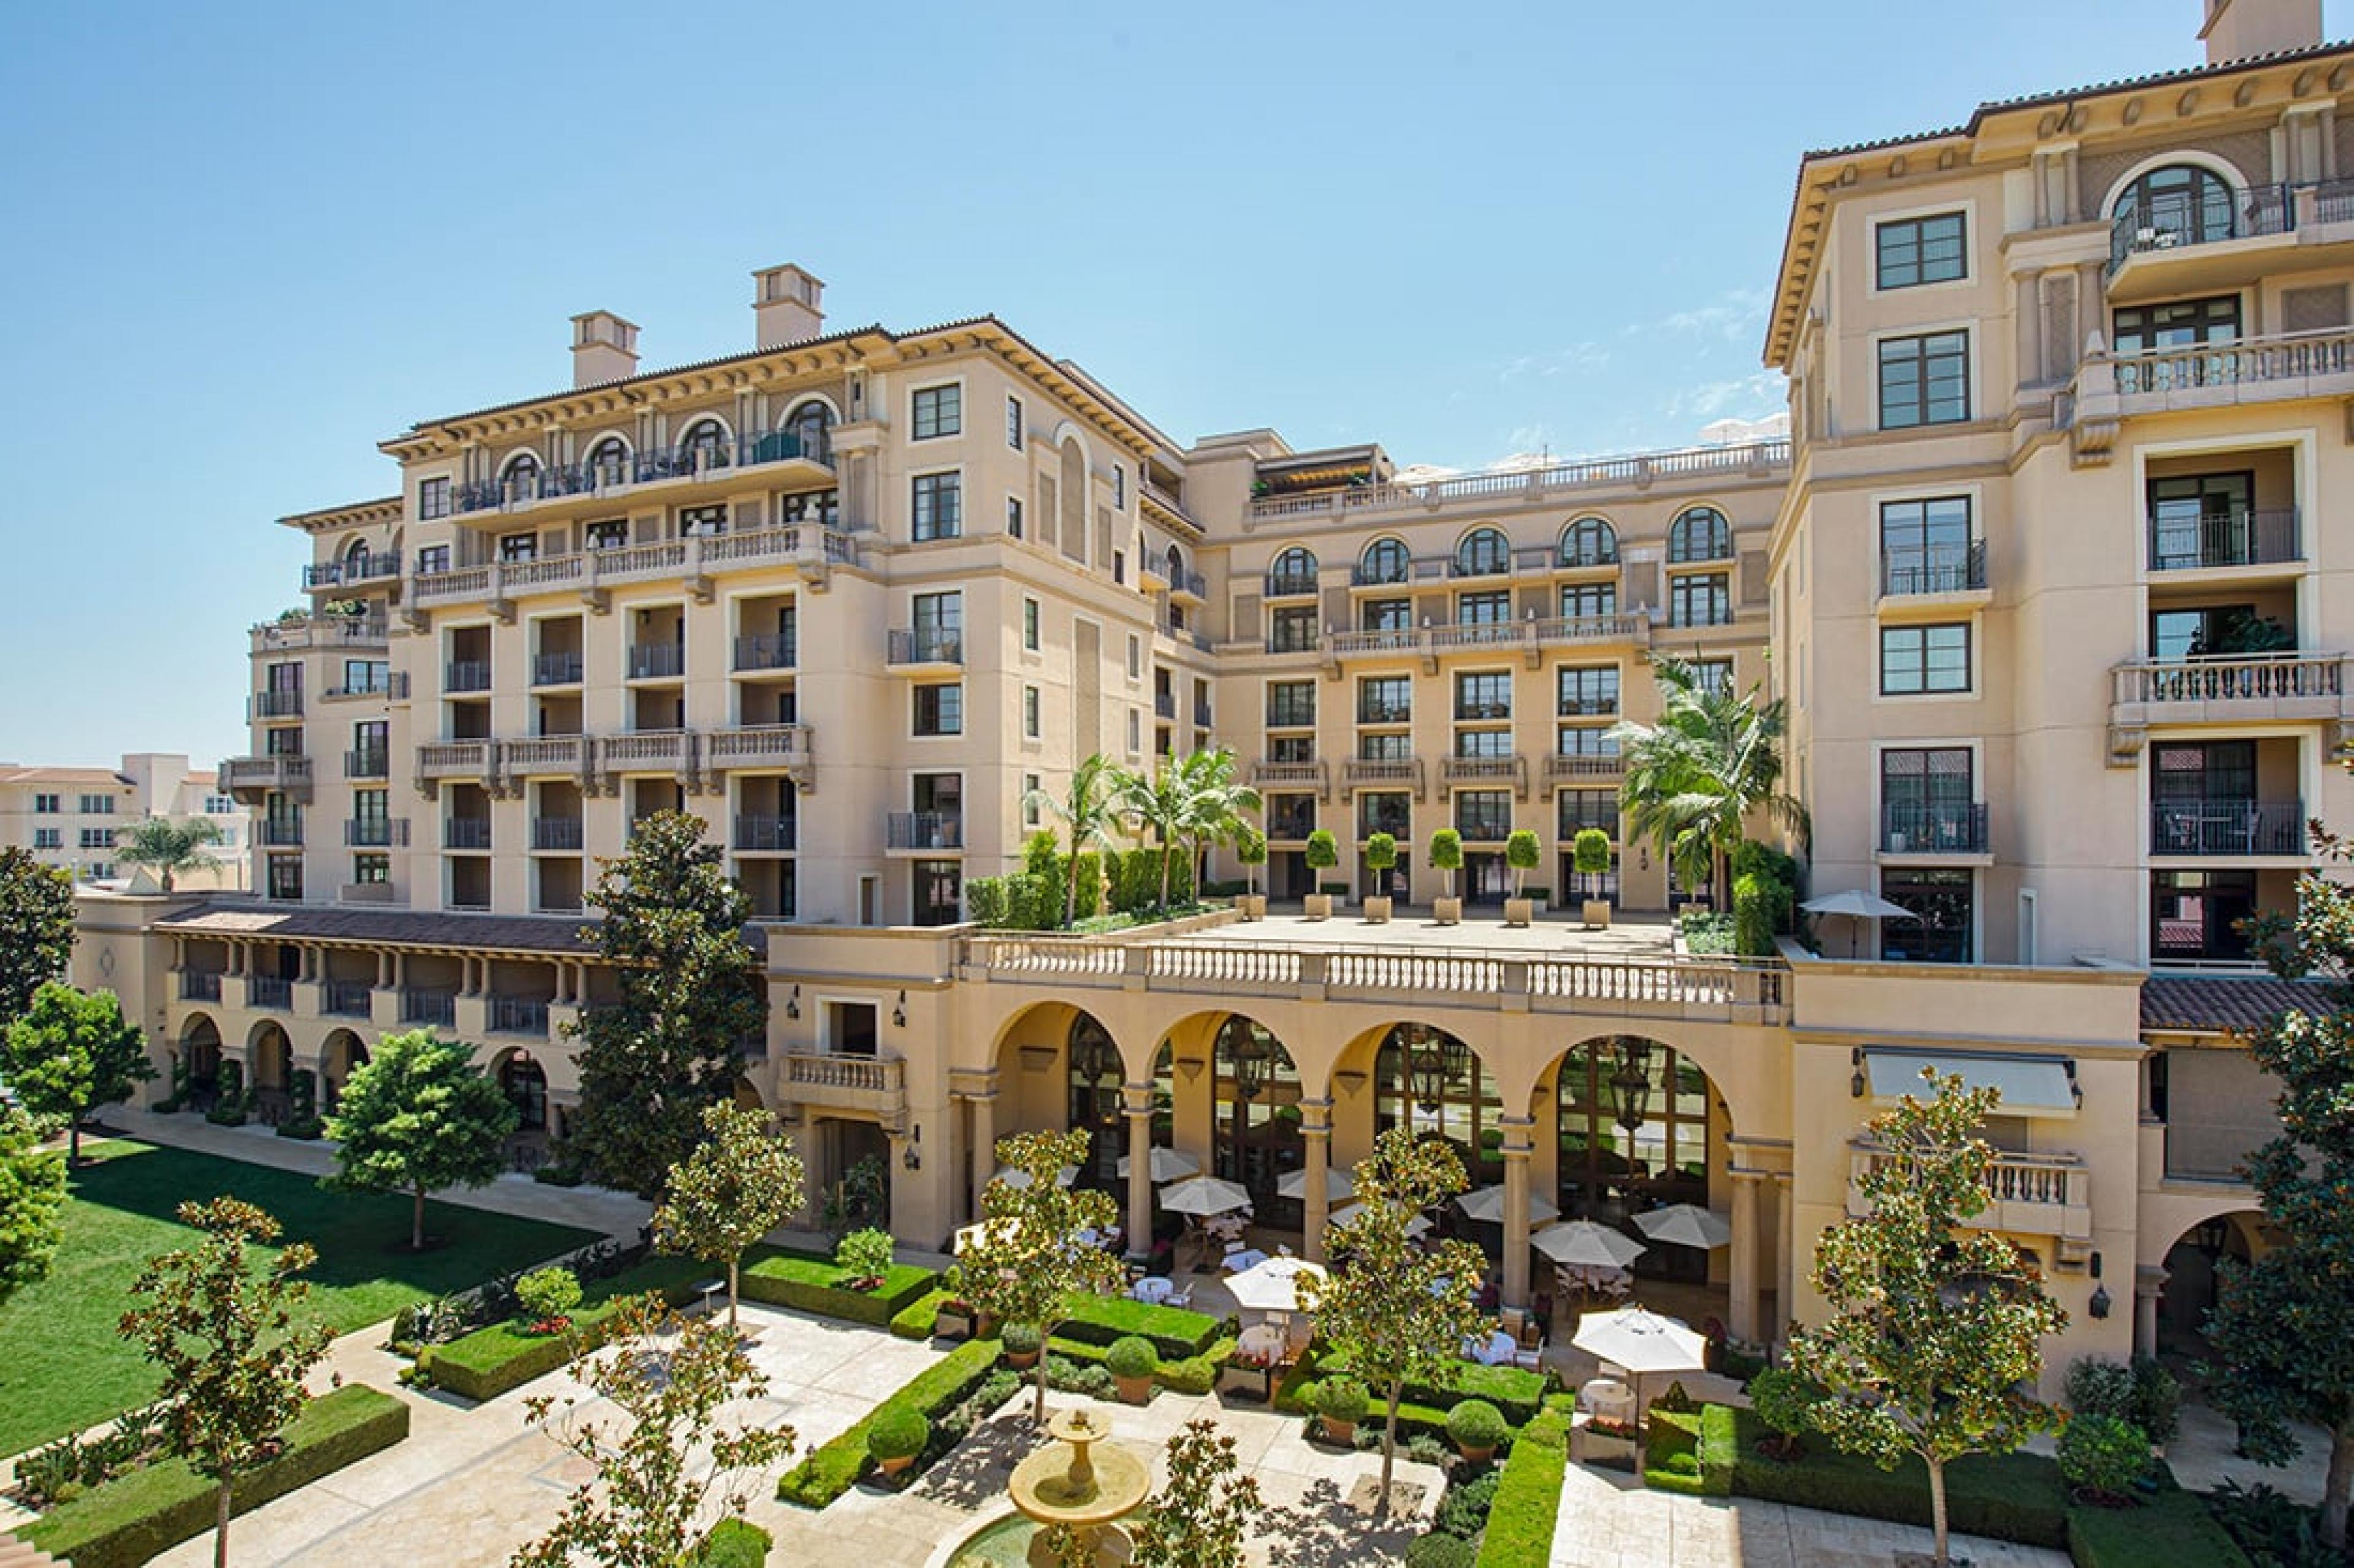 exterior of grand hotel building with french-style architecture in Los Angeles